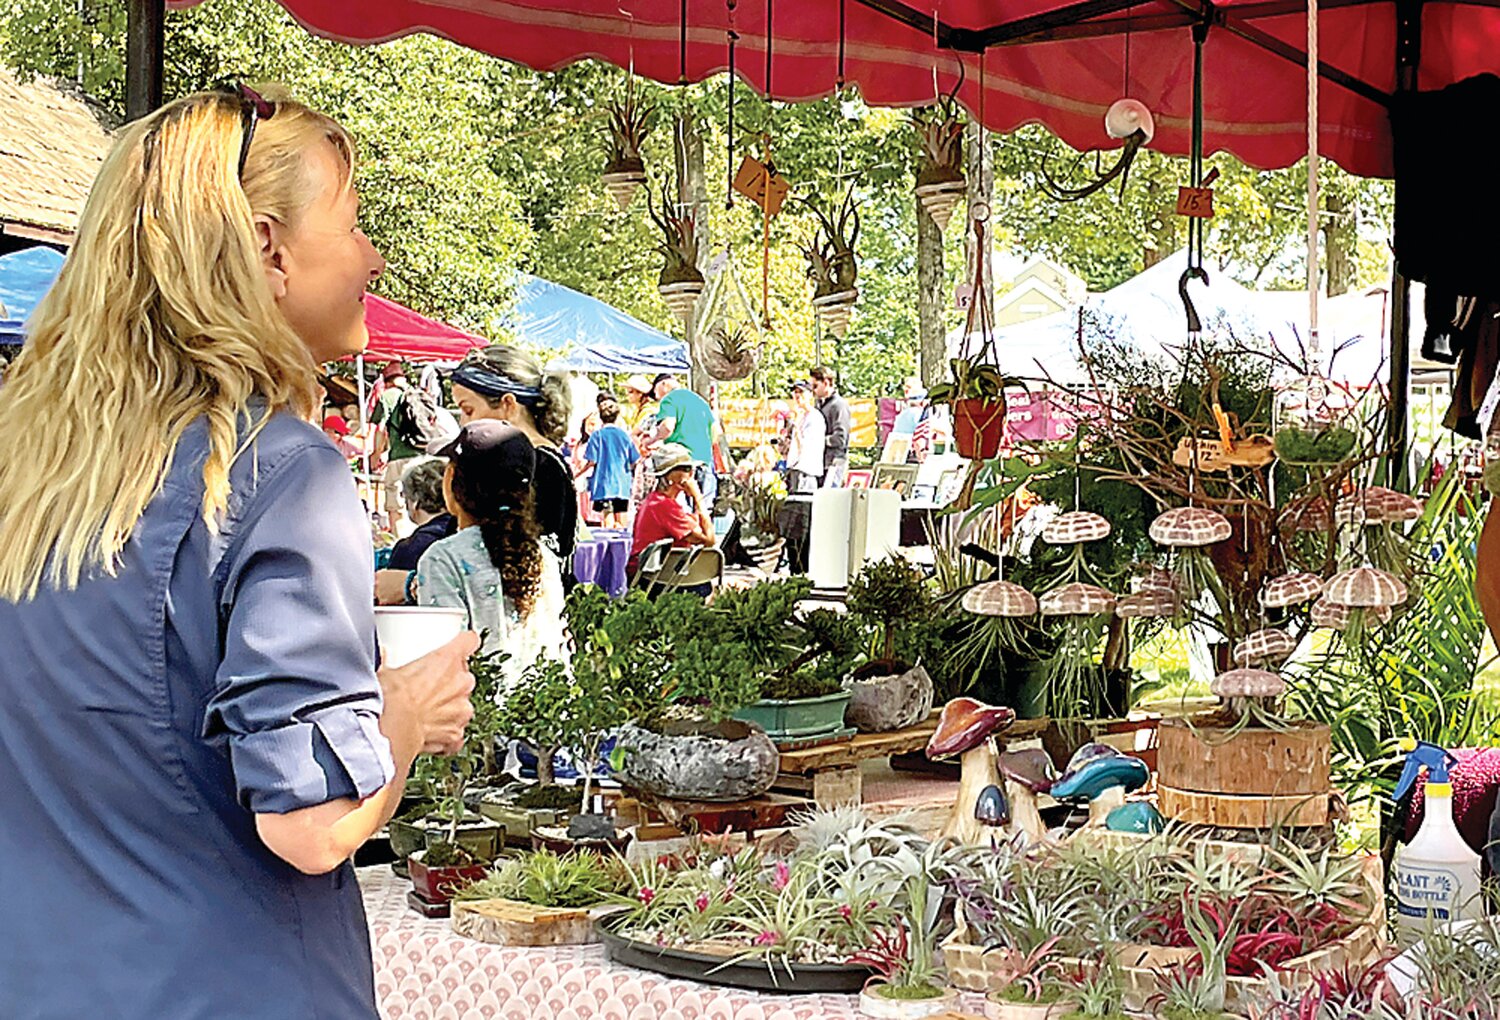 A woman looks at a display from Nature’s Design at at prior Peace Fair.